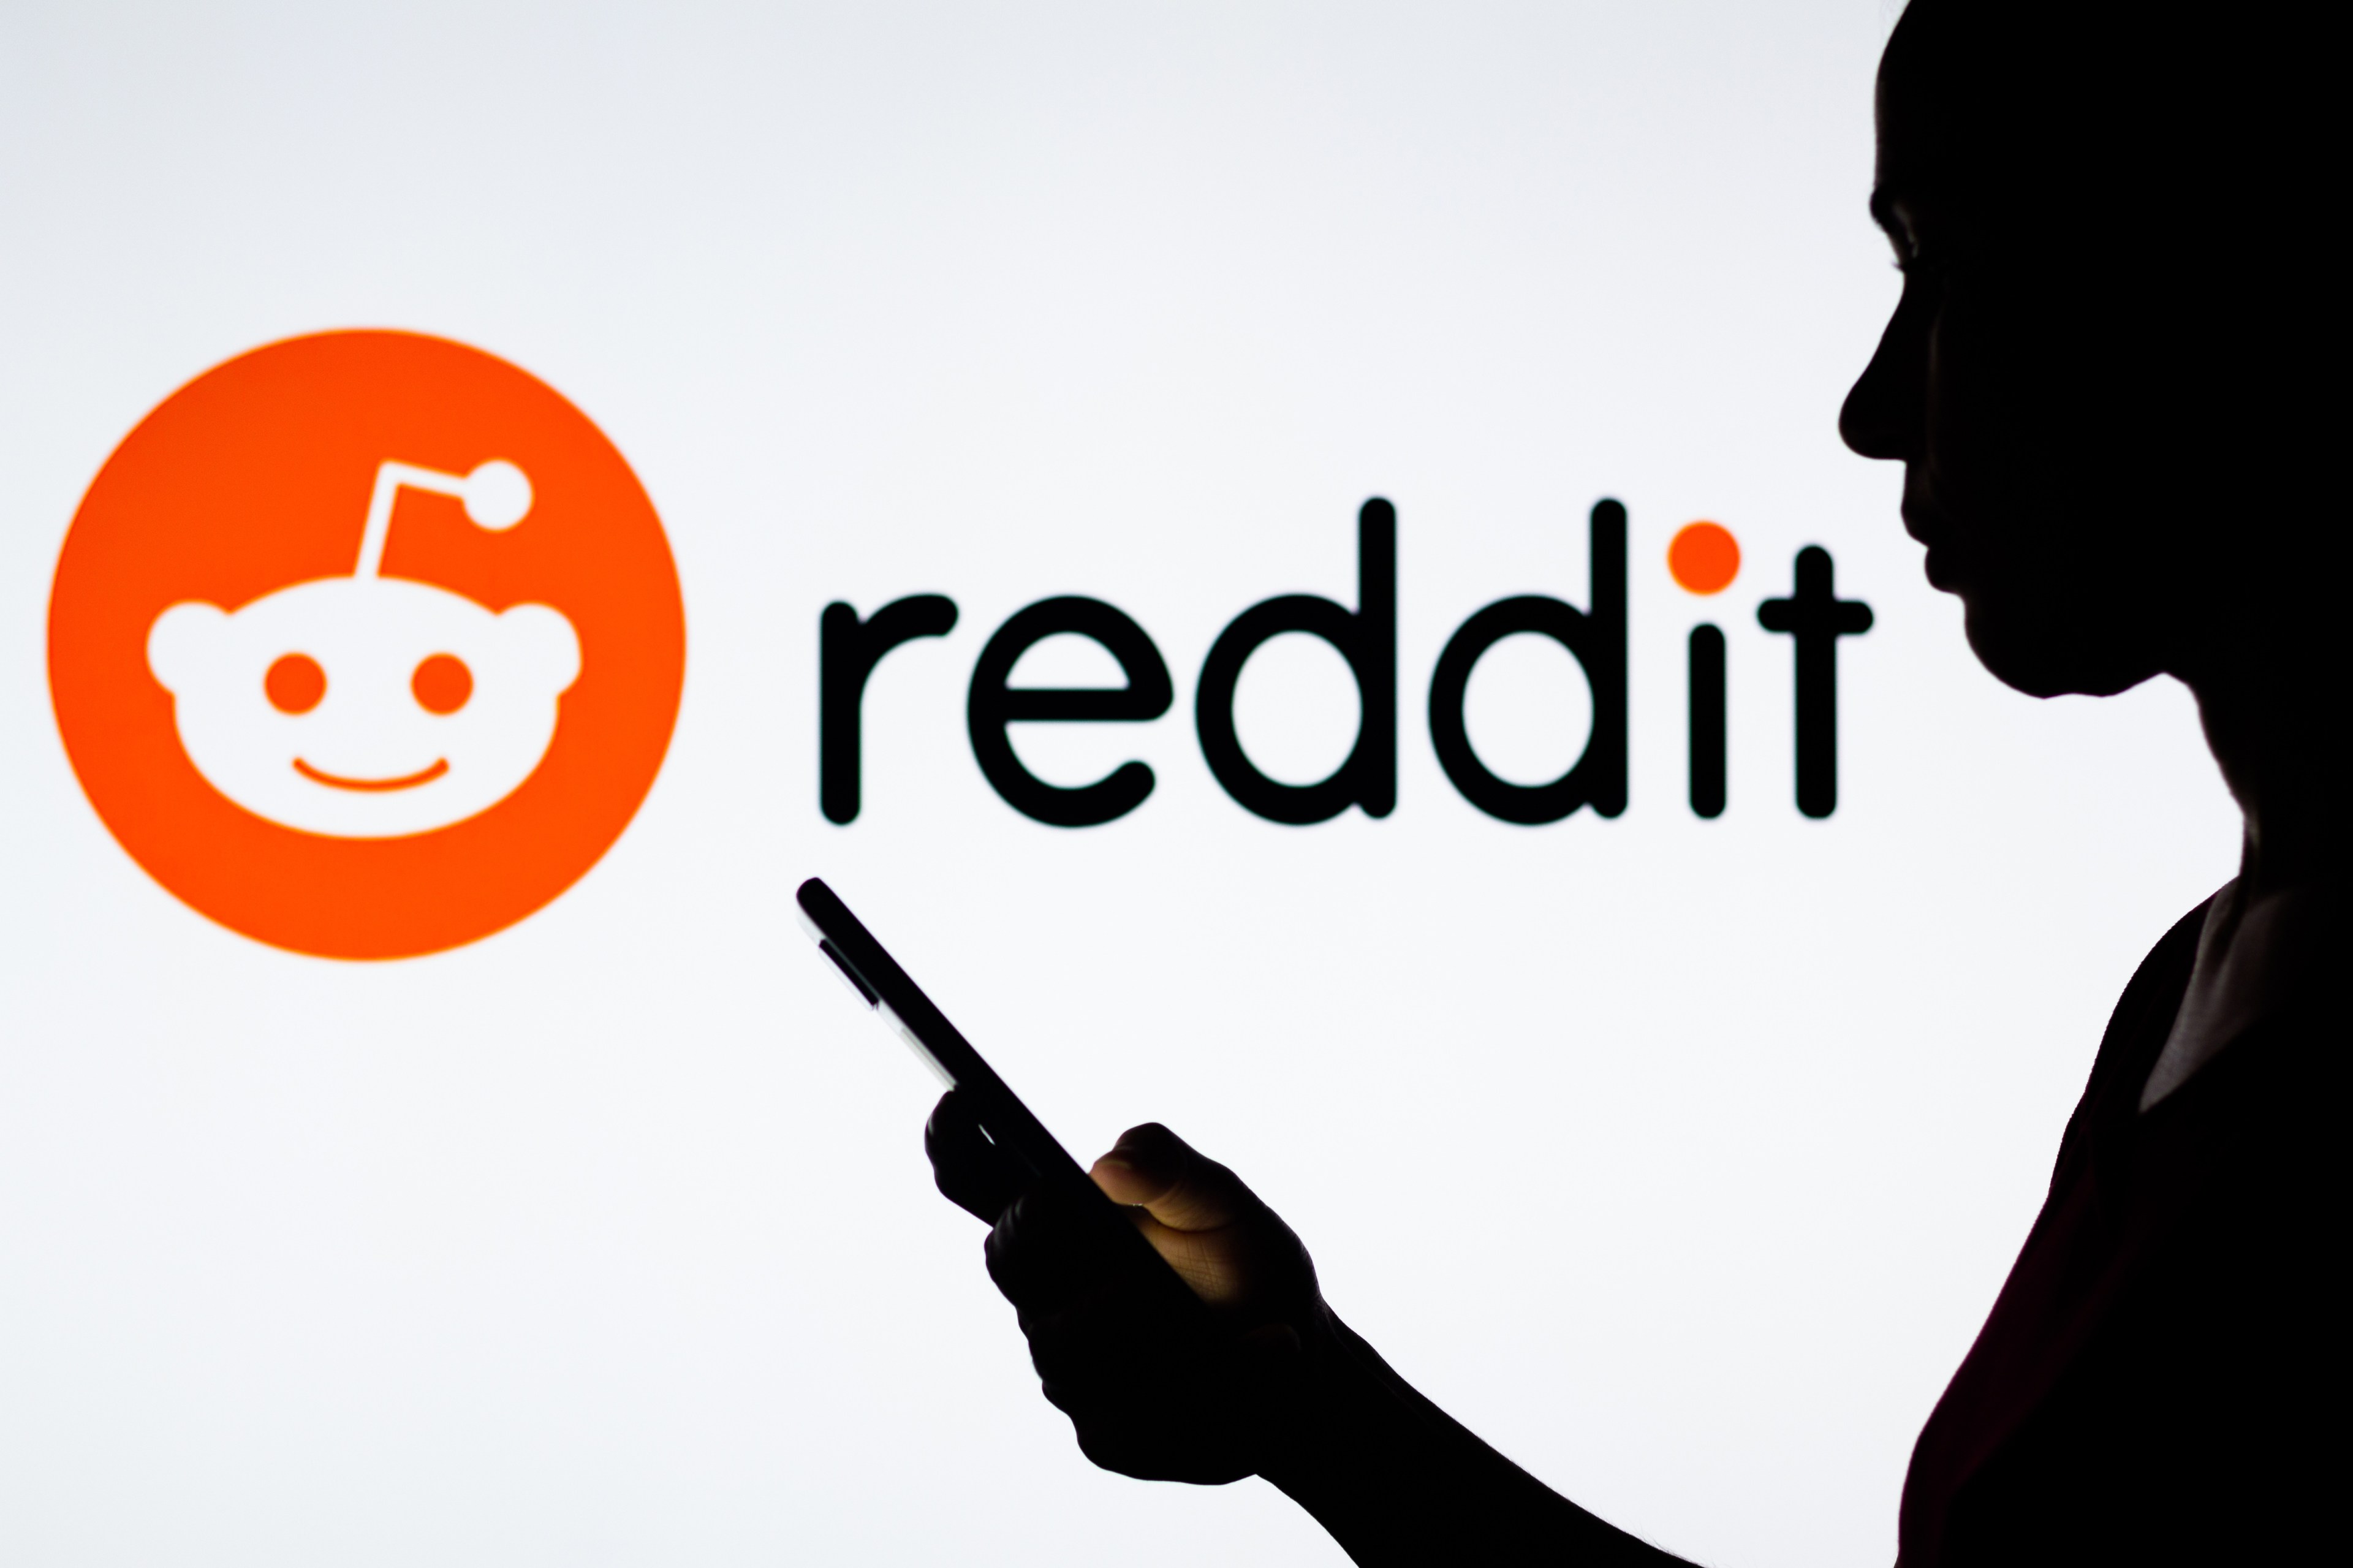 Silhouette of a person using a phone against the bright Reddit logo.